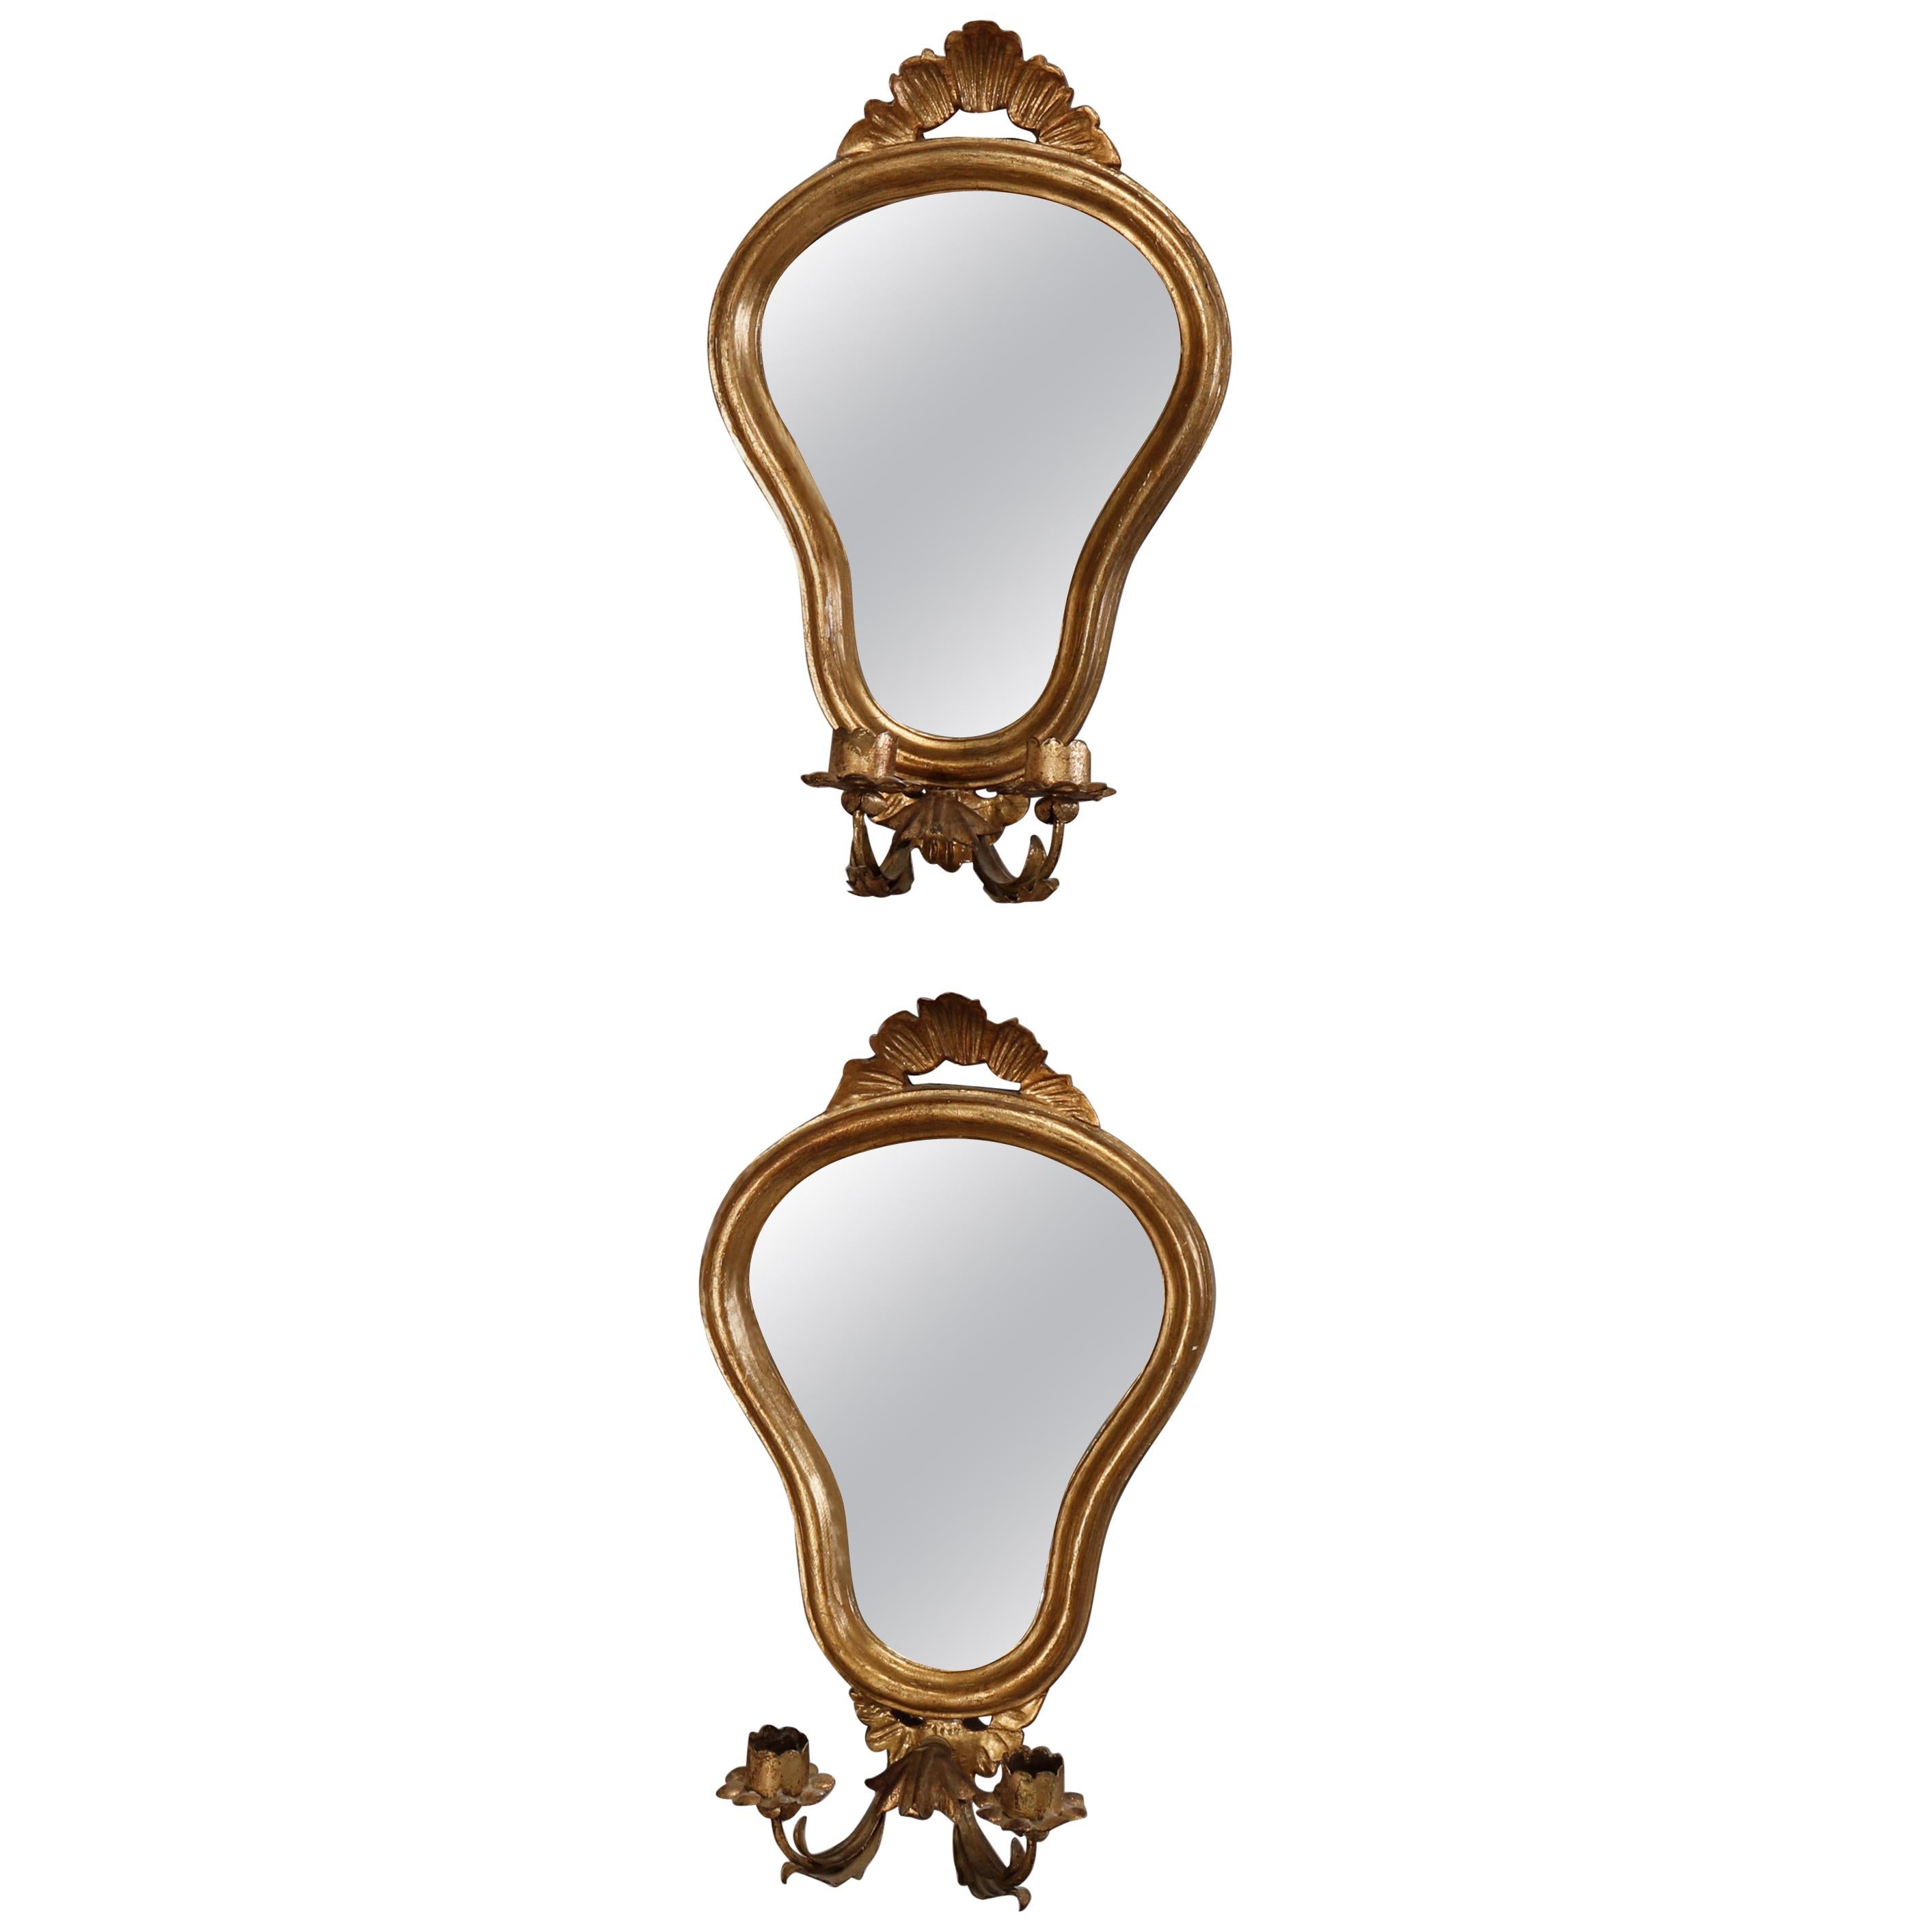 Vintage Venetian Style Mirrored Giltwood Candle Wall Sconces, 20th Century, Pair